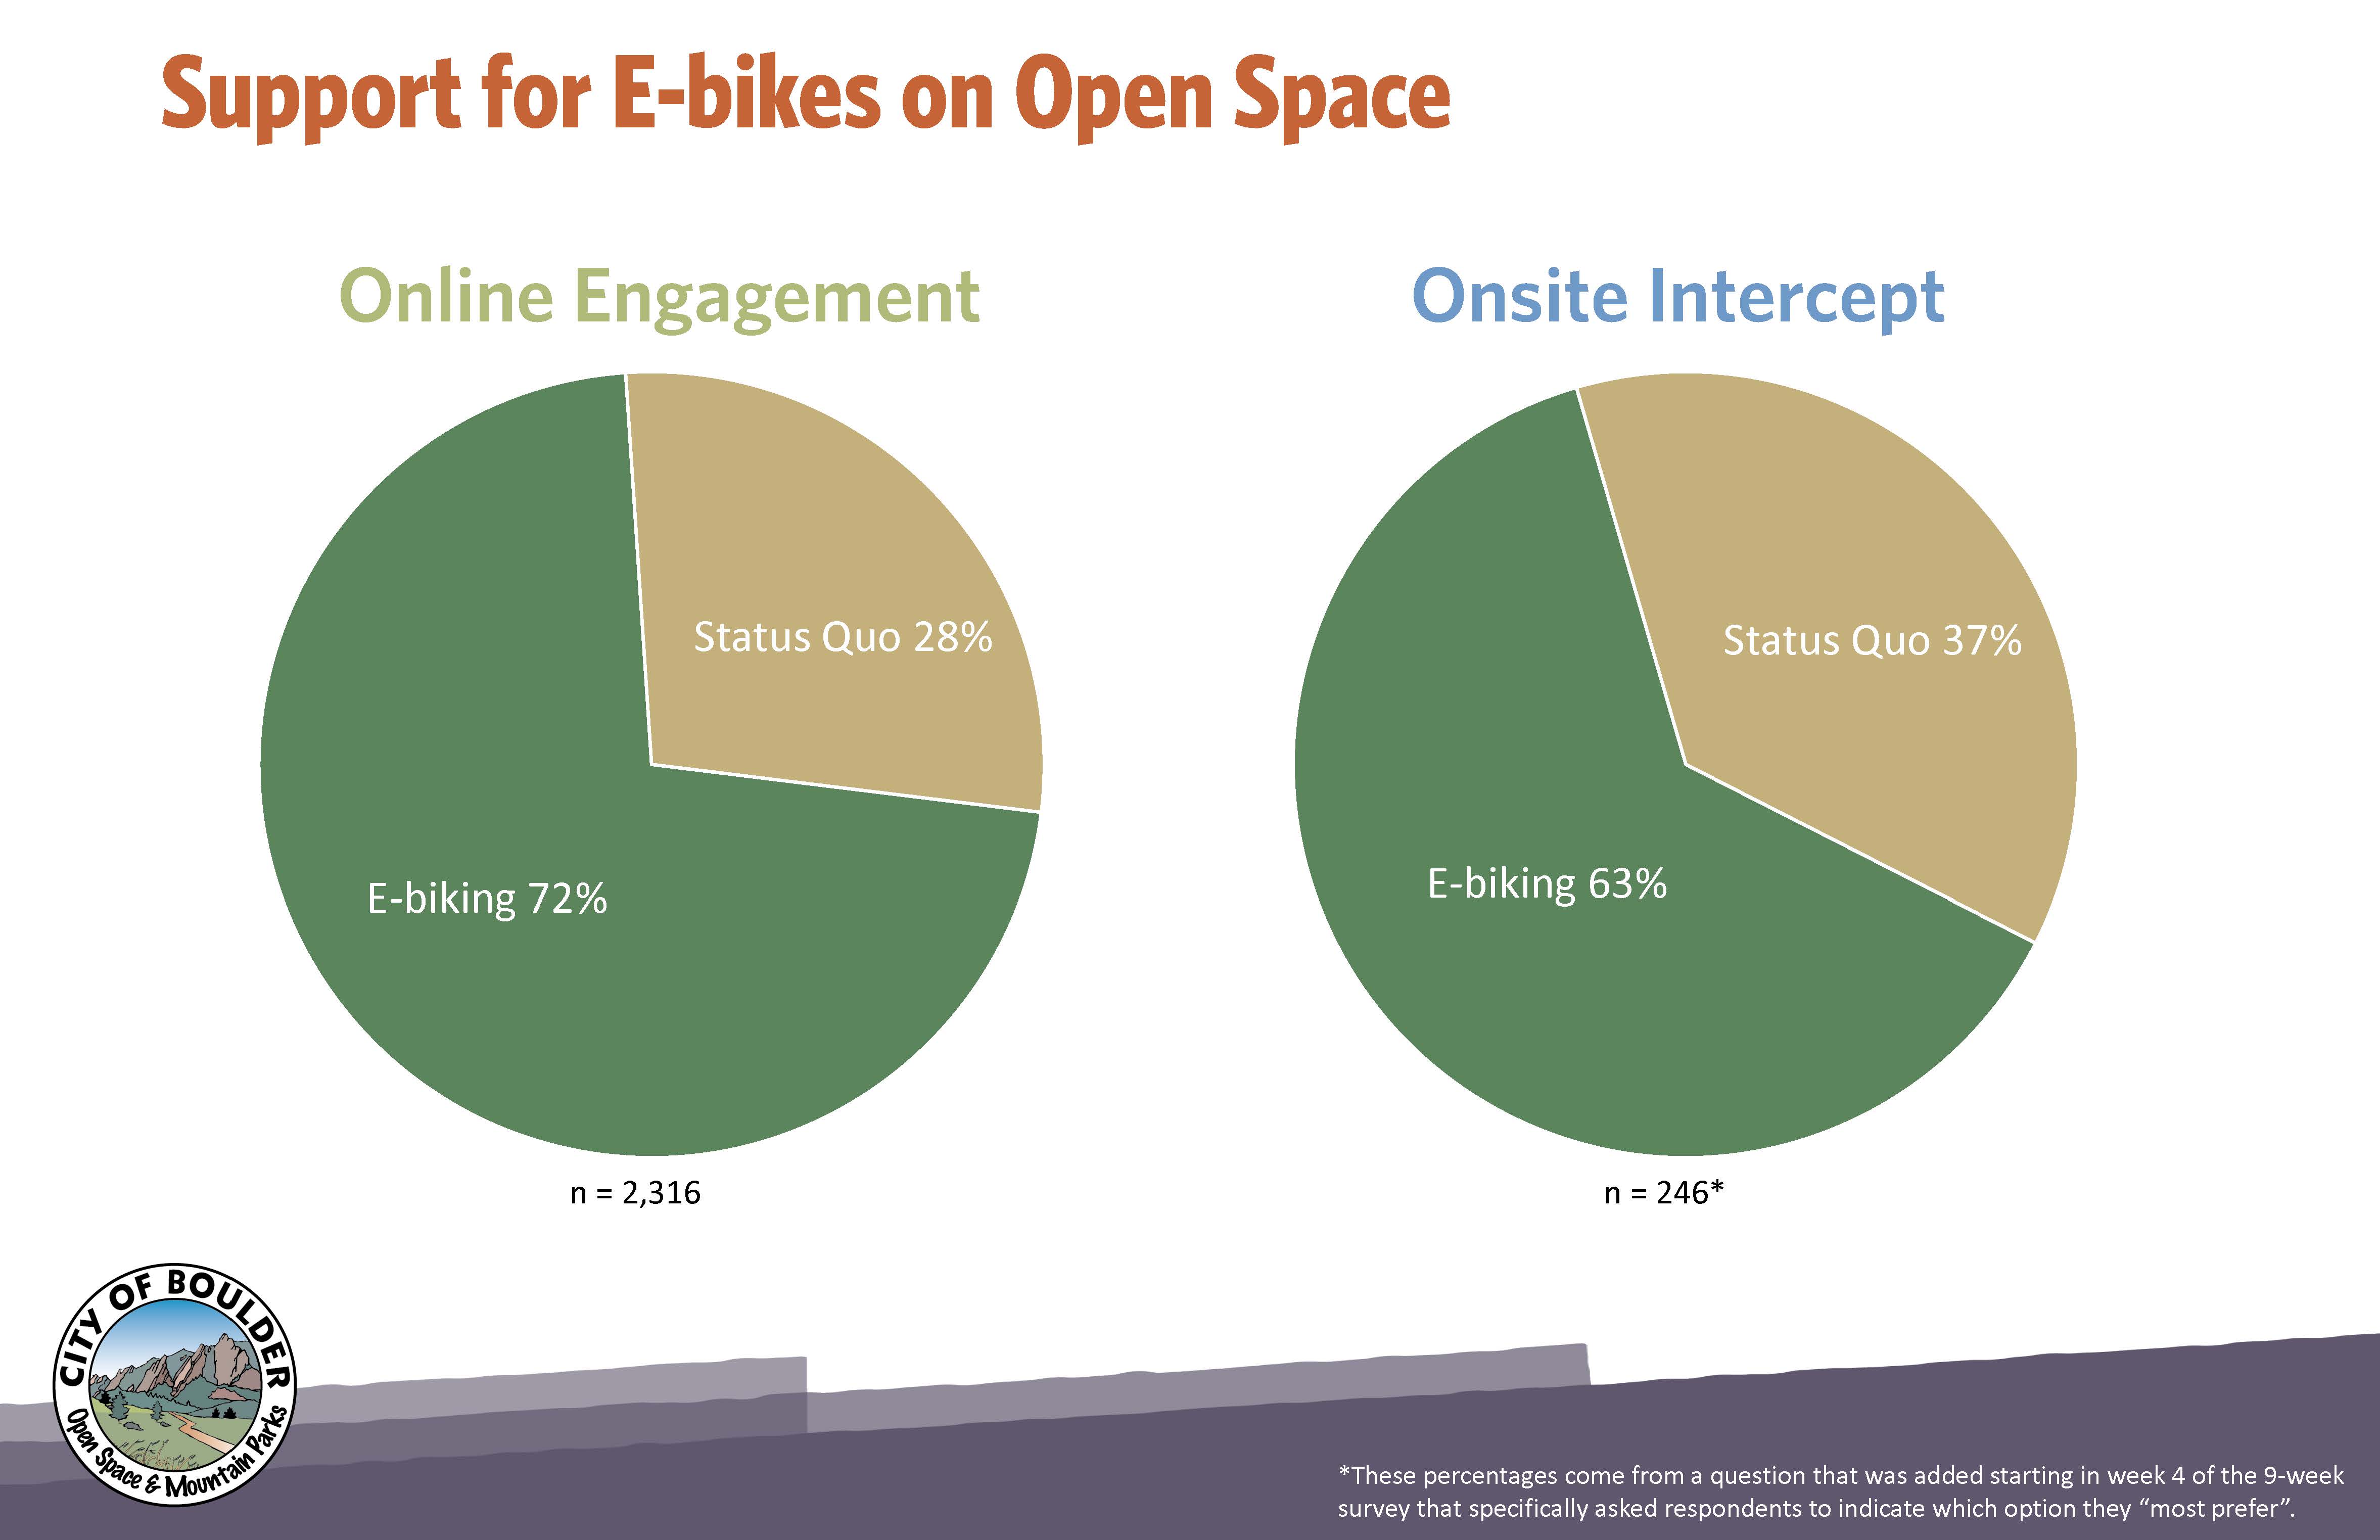 Overall Support for E-bikes on OSMP. Online engagement questionnaire showed 72% support and onsite intercept survey showed 63% support.